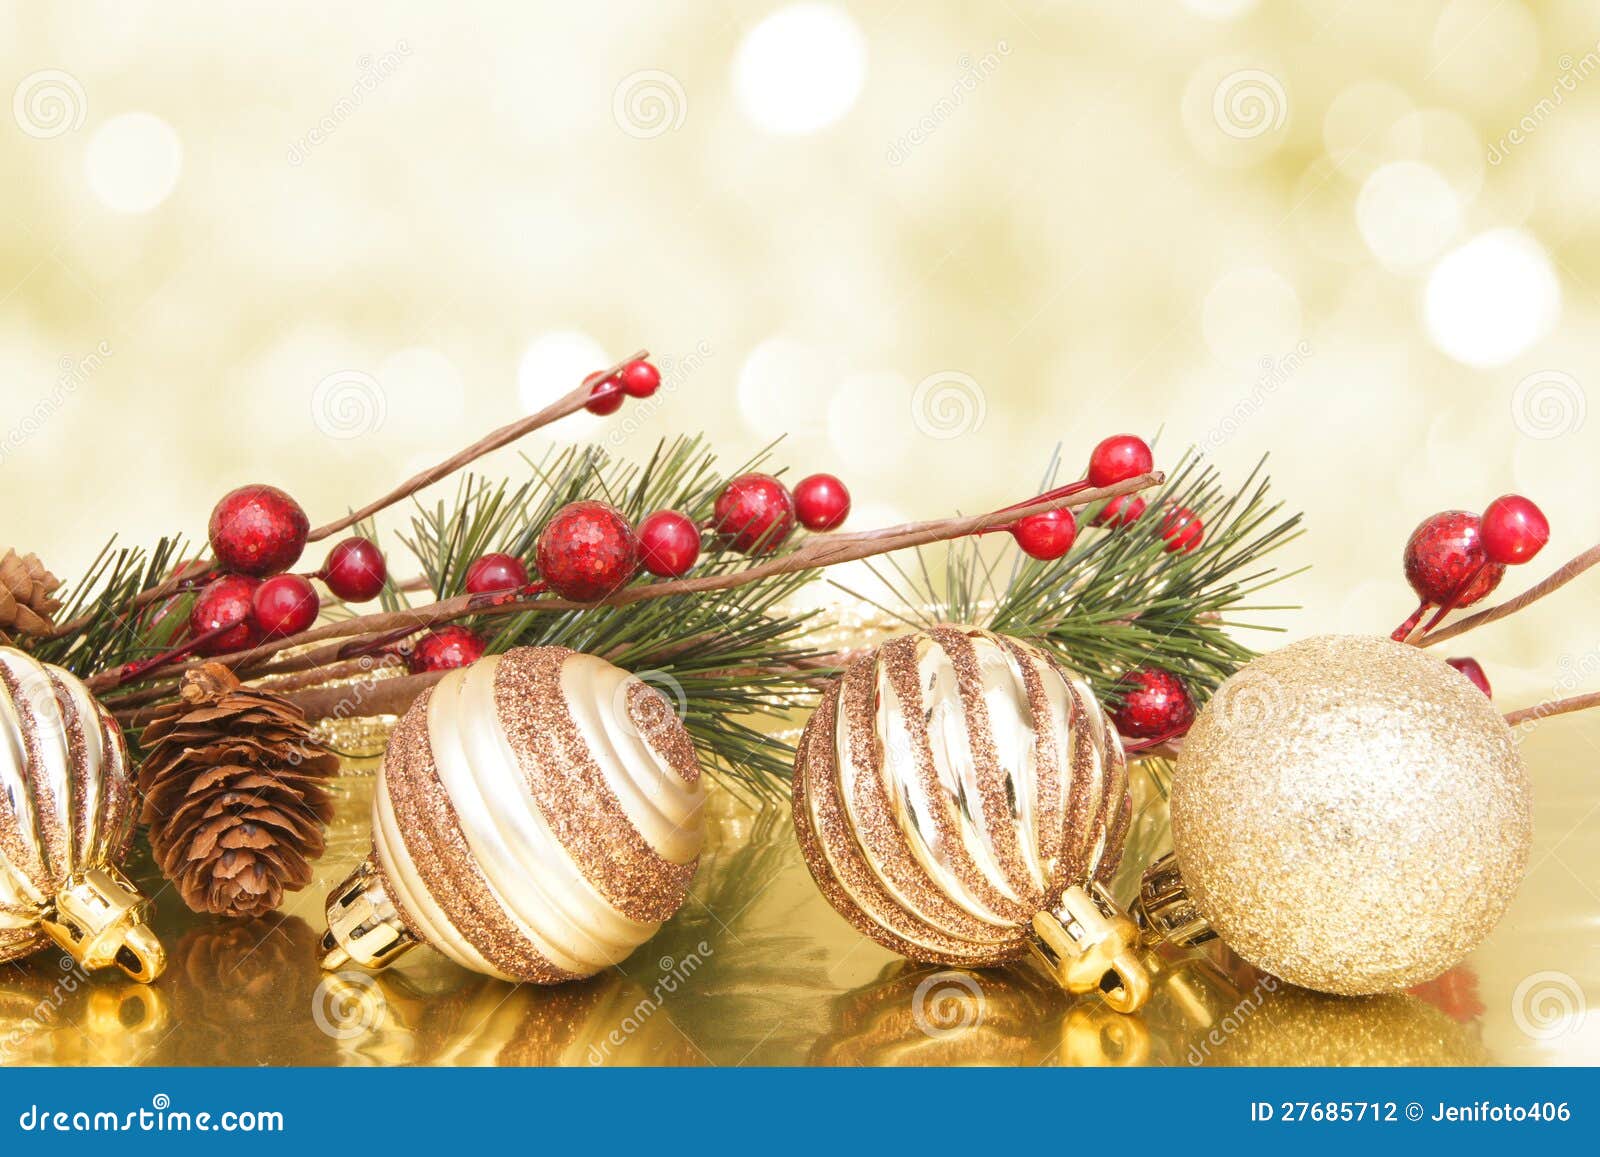 Golden Christmas scene stock photo. Image of card, culture - 27685712